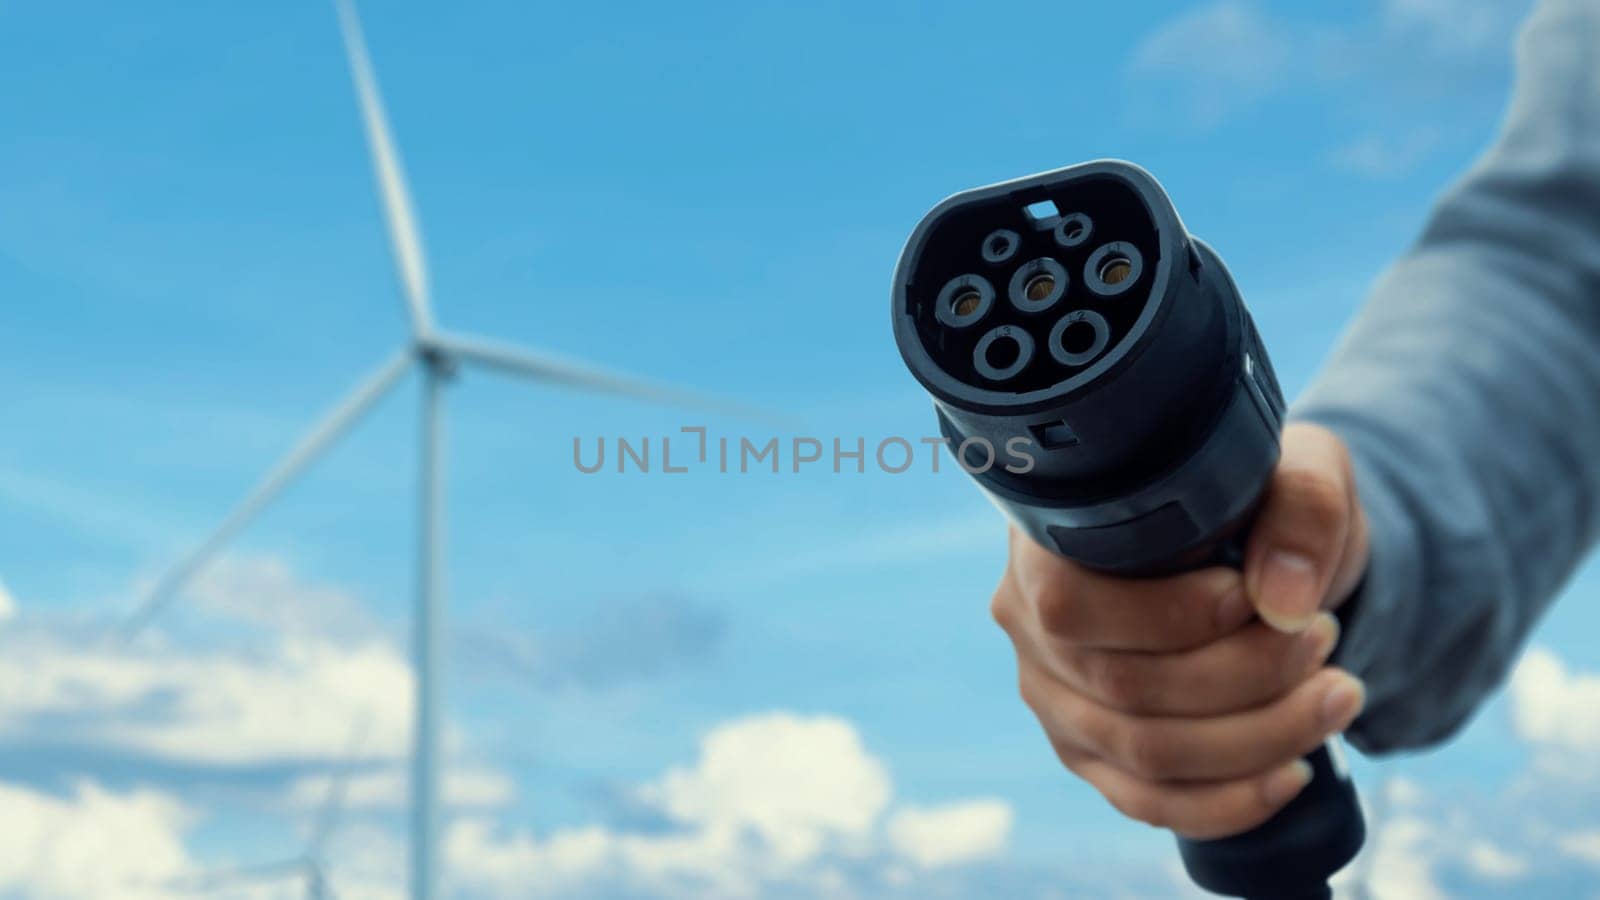 Focus EV charger pointing in front of camera with blurry businessman's hand wind turbine farm in background. Electric car charger plug using alternative clean energy reducing CO2 emission. Peruse